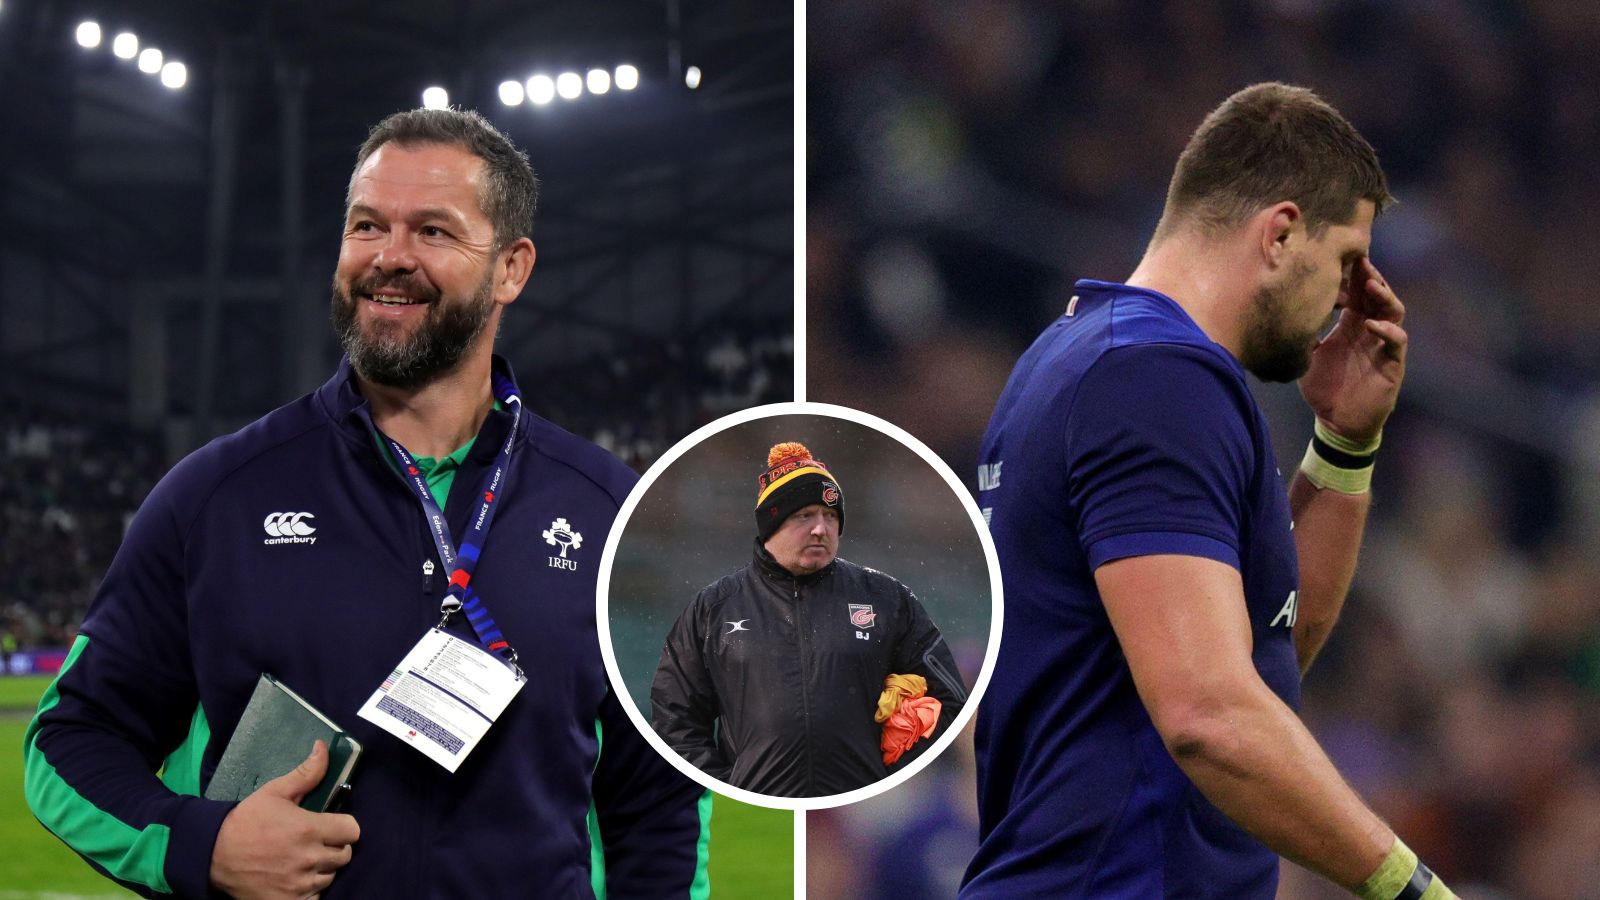 bernard jackman’s five things we learnt from round one of the six nations: andy farrell’s mind games, france’s ‘serious issues’, england teething, italy rejuvenated